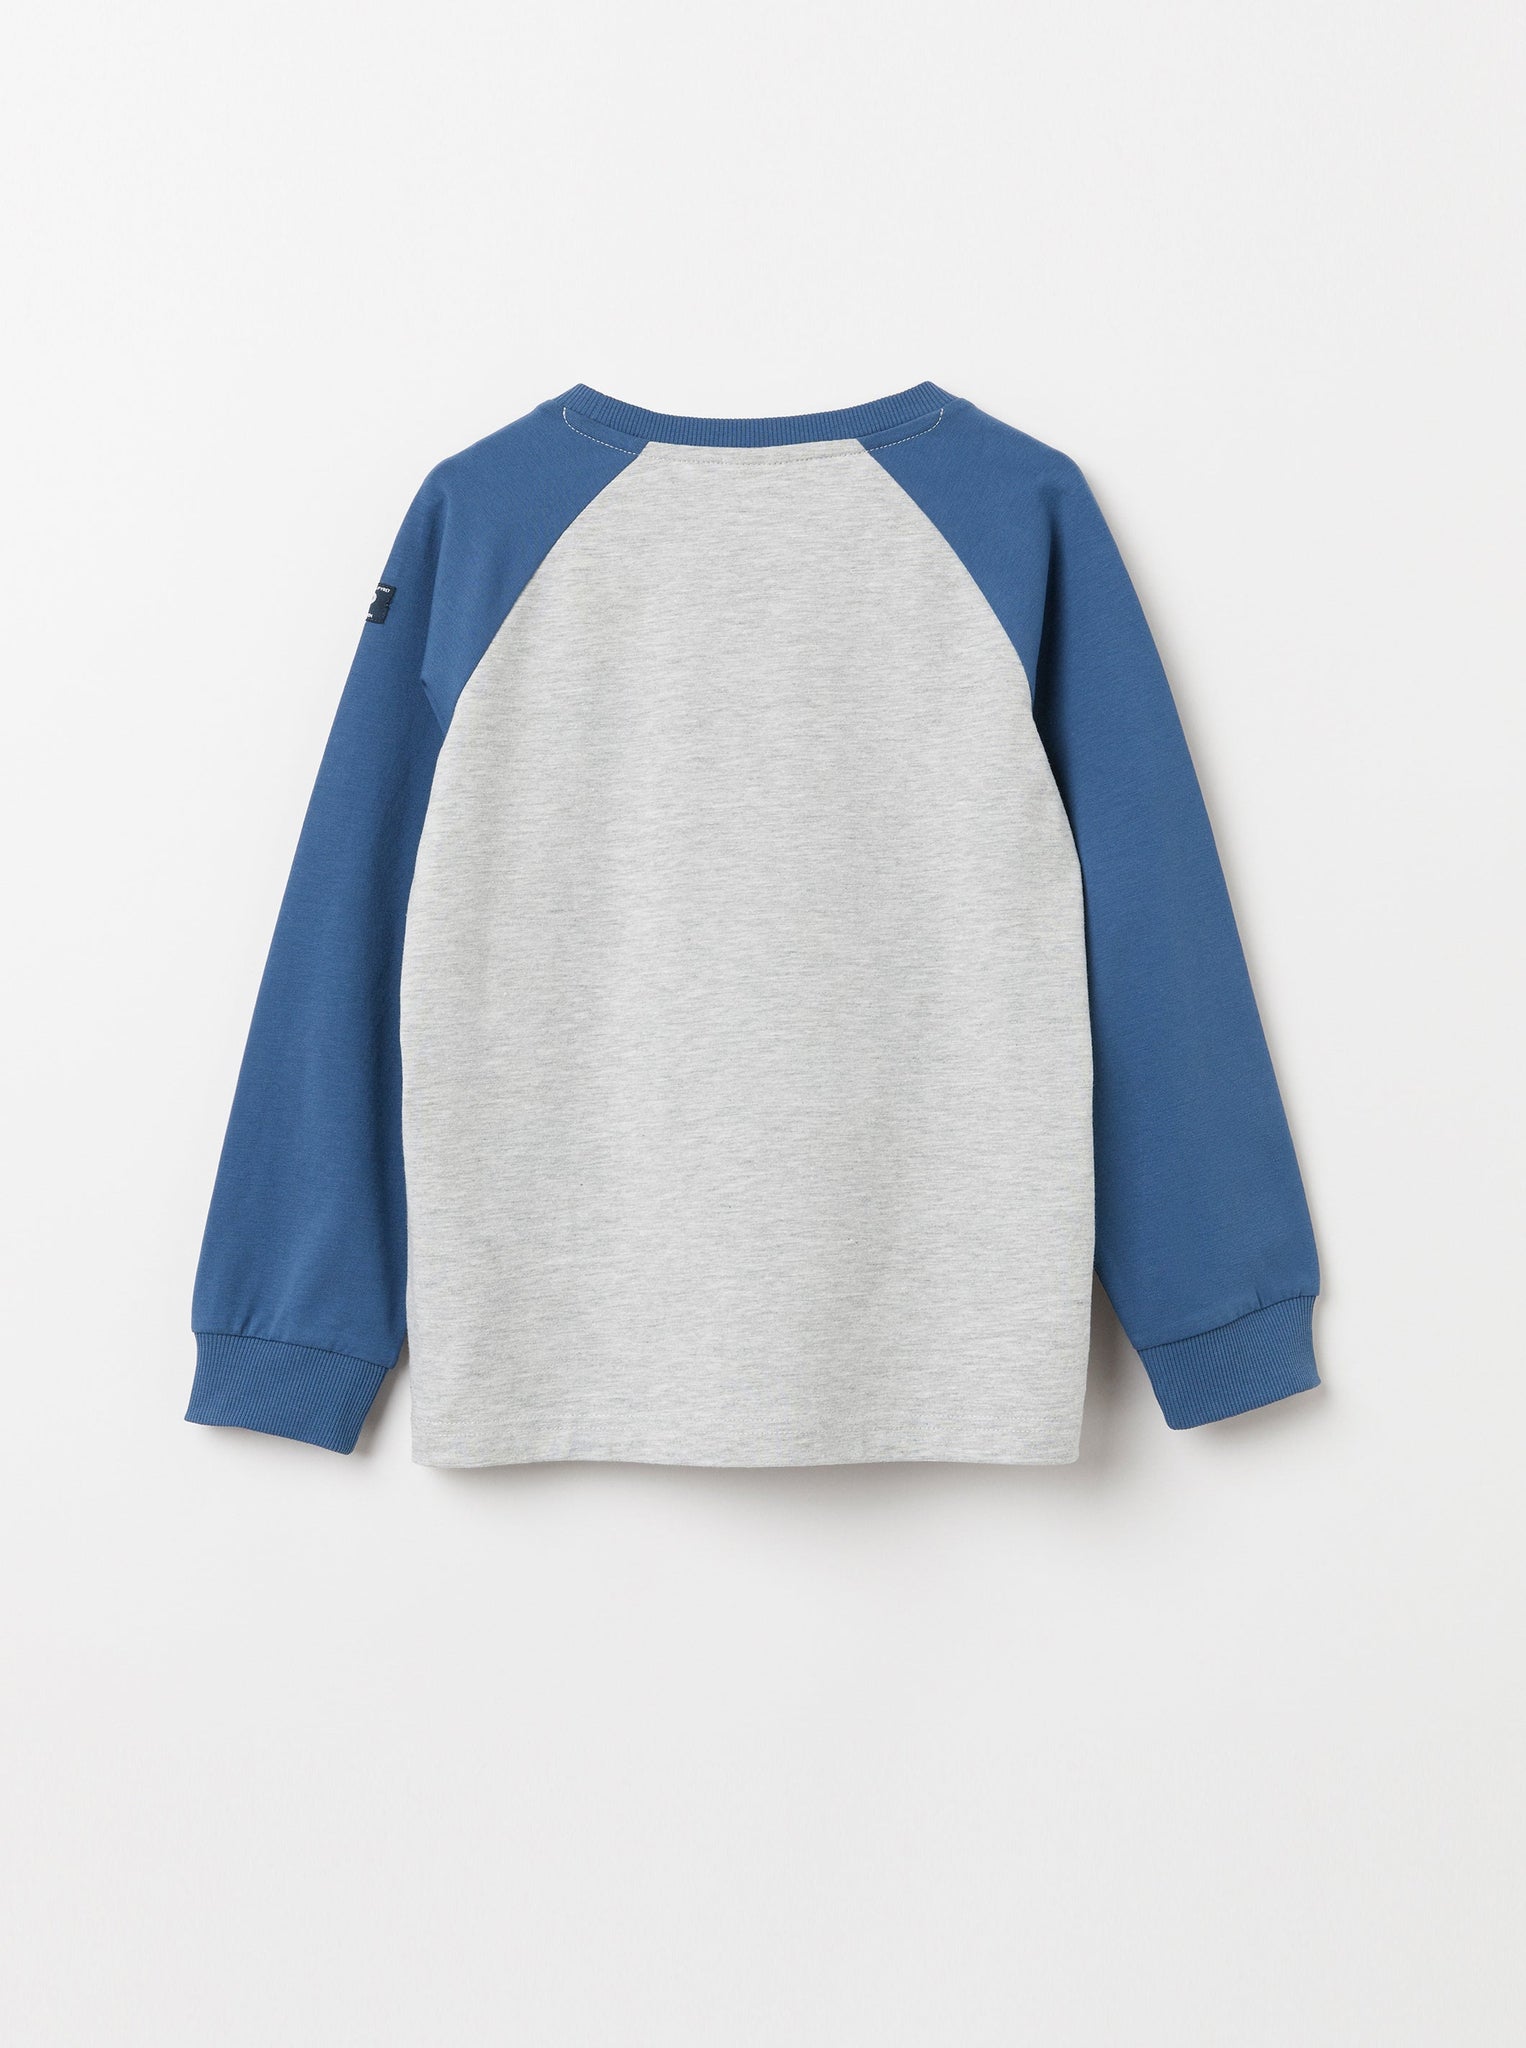 Organic Cotton Race Car Kids Top from the Polarn O. Pyret Kidswear collection. Nordic kids clothes made from sustainable sources.